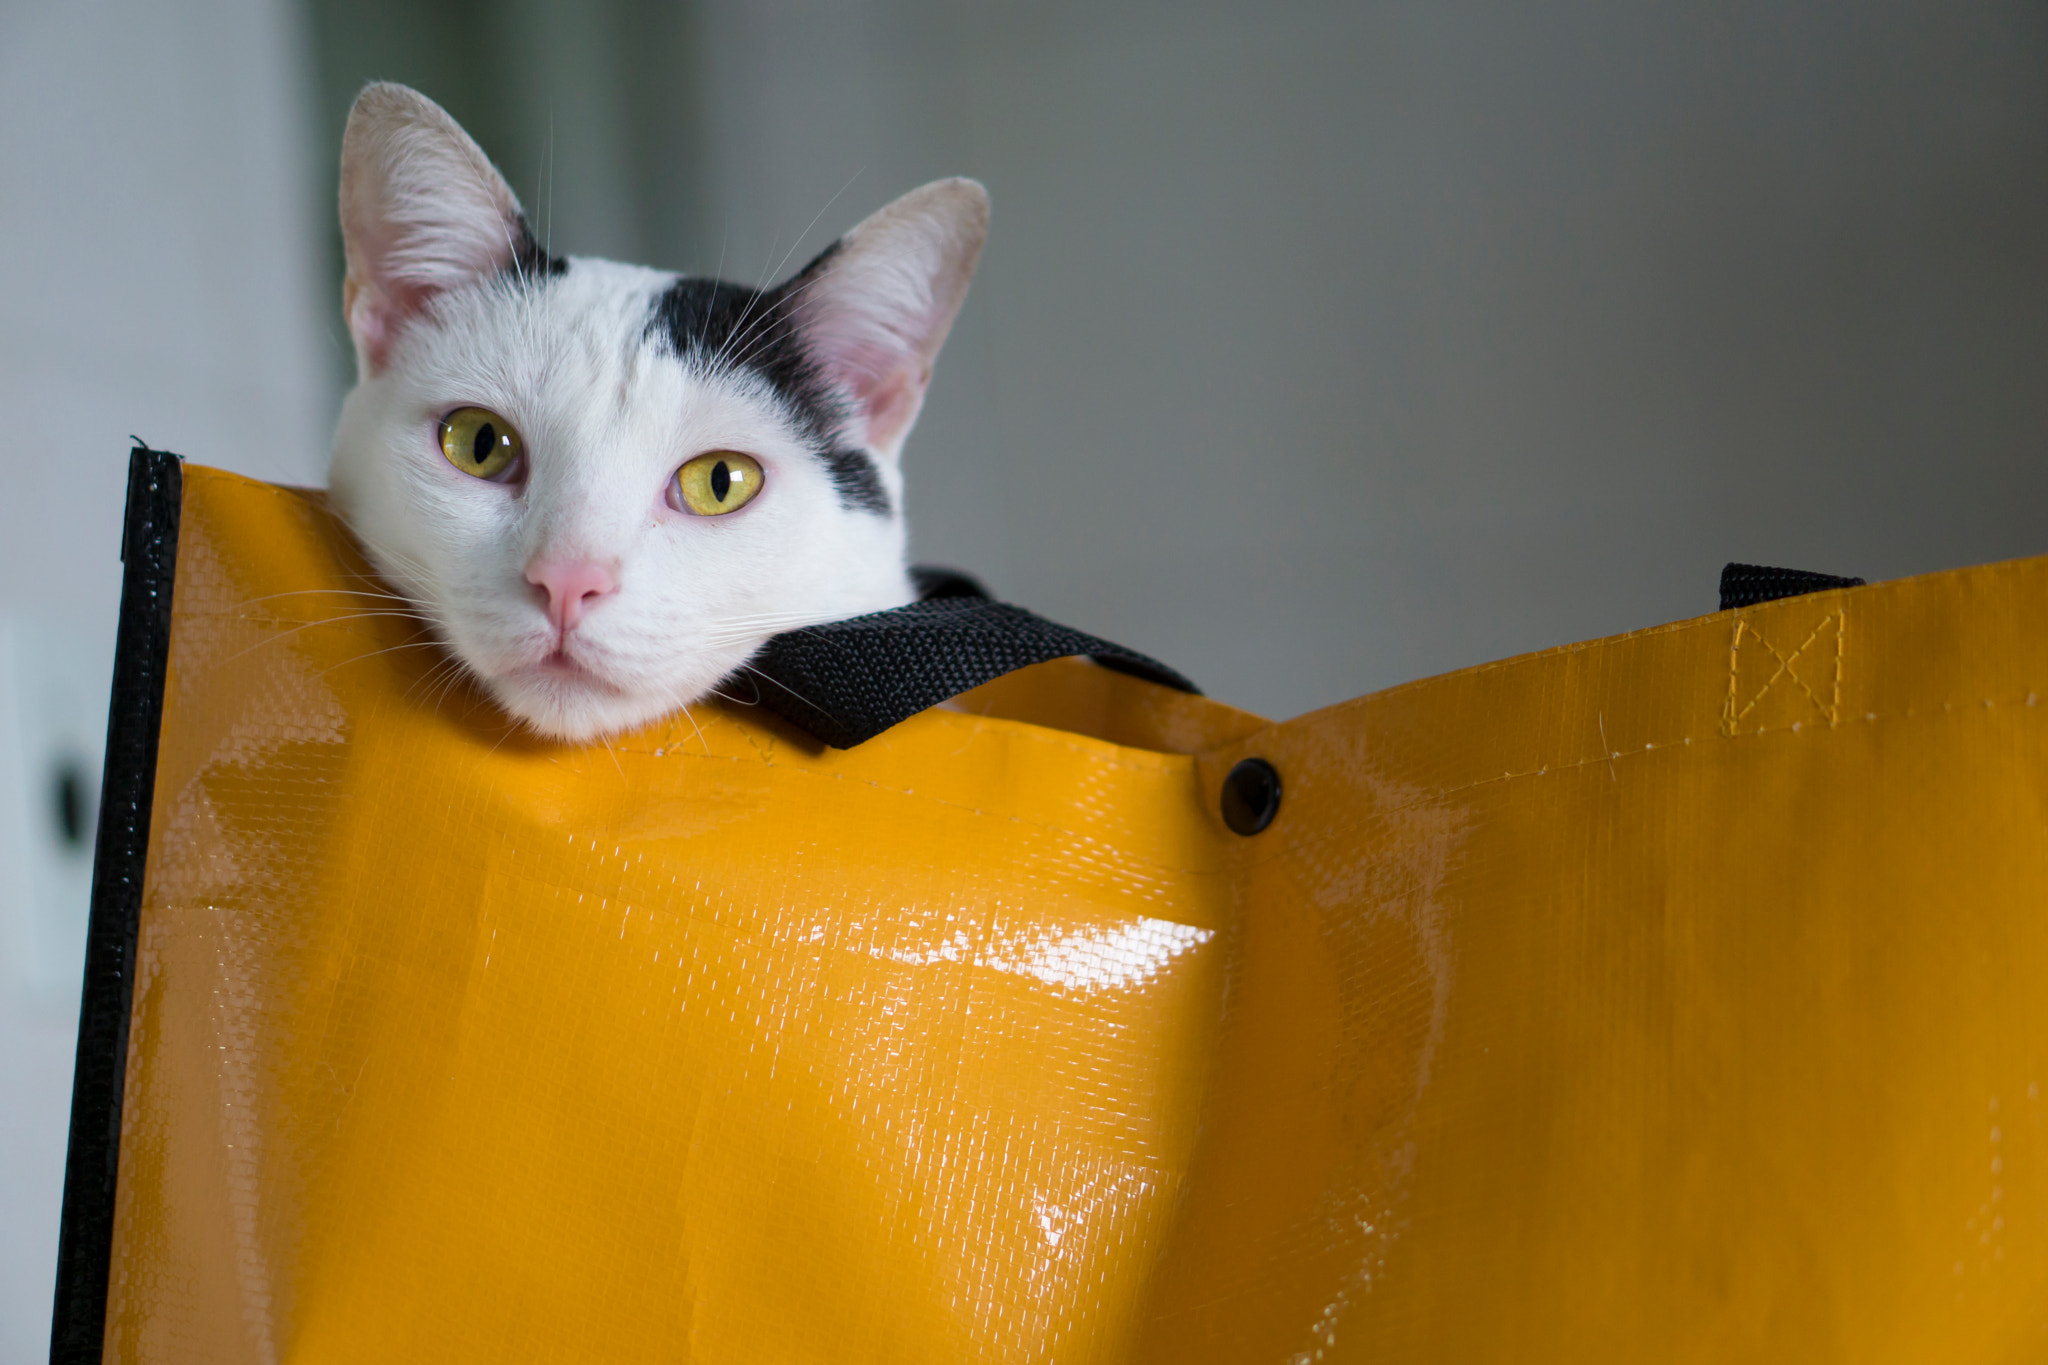 Sony a5100 sample photo. Cat in a bag photography